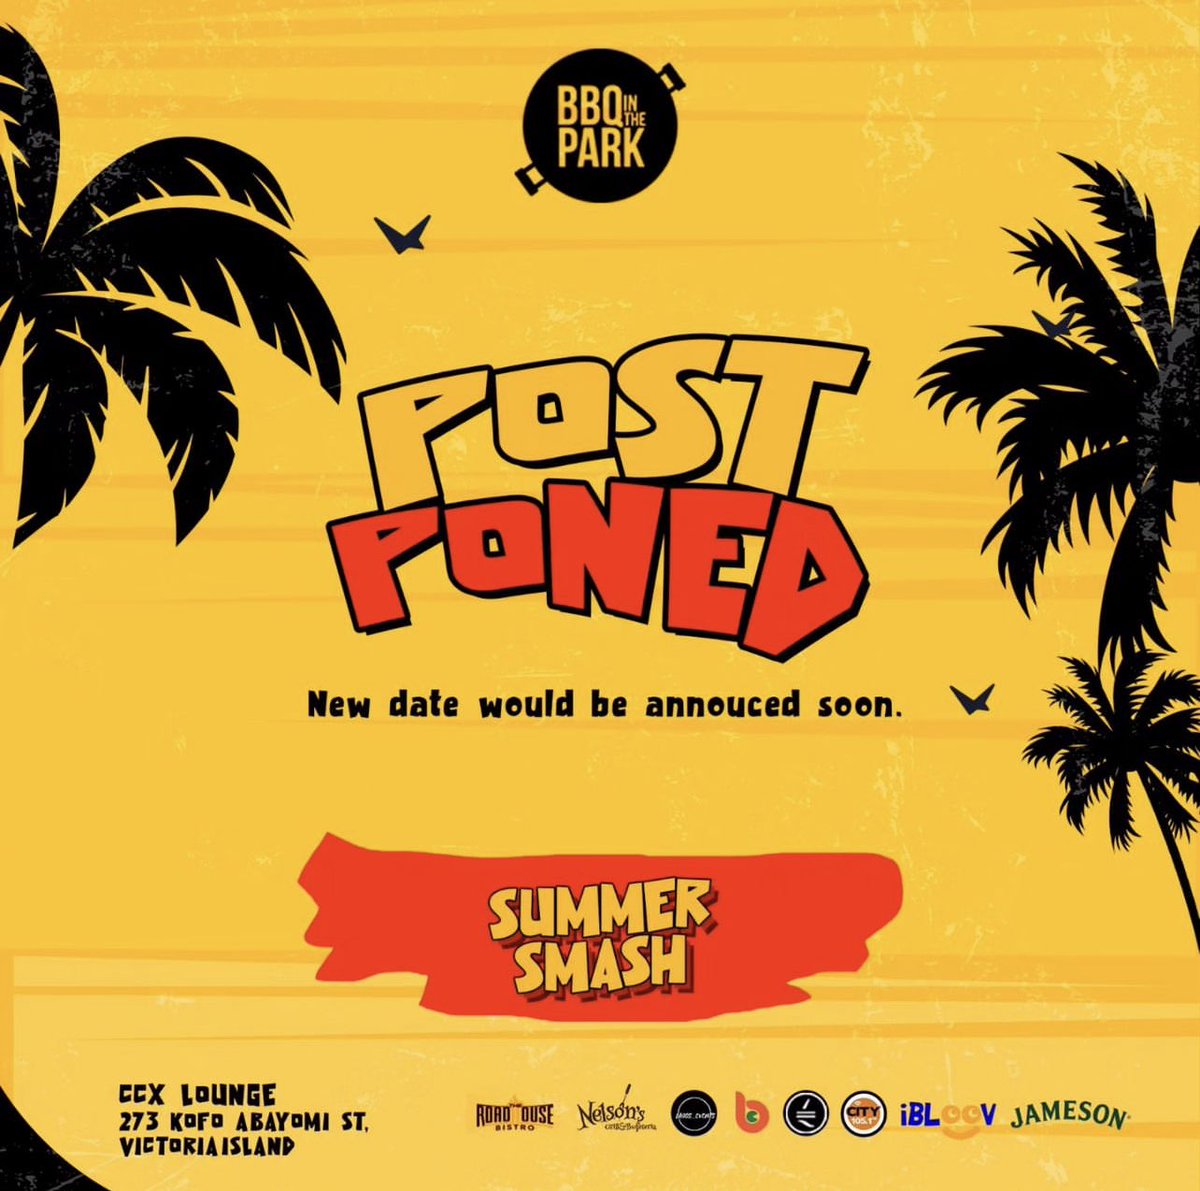 For my people coming for me, 
Summer smash has been postponed 

A new date will be announced soon 🖤
@BbqinDPark